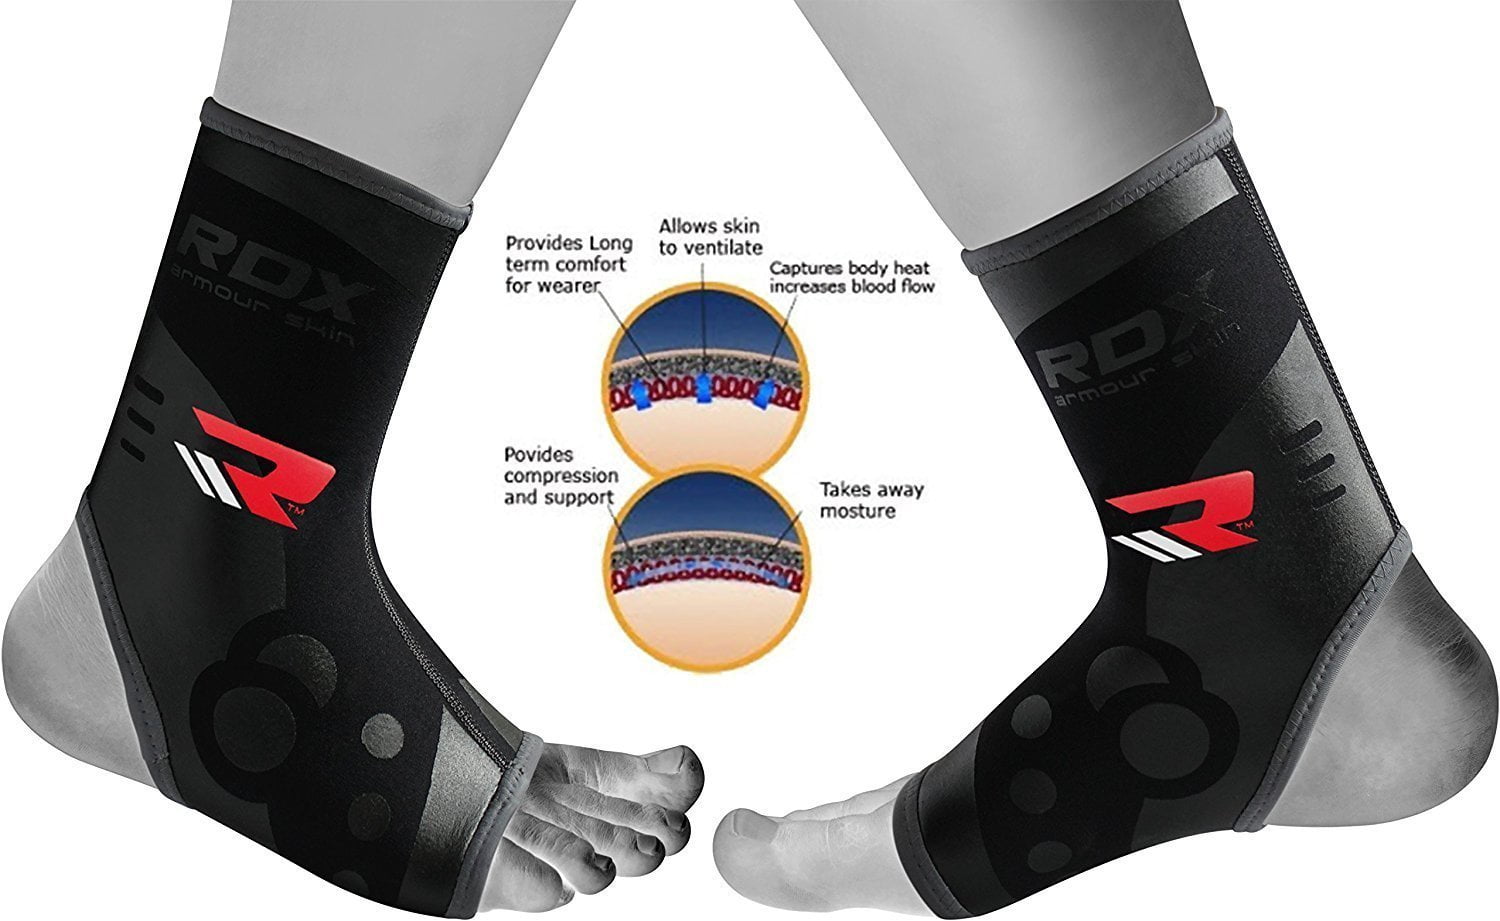 RDX Ankle Support MMA Brace Foot Guard Boxing Protector Achilles Tendon Pain